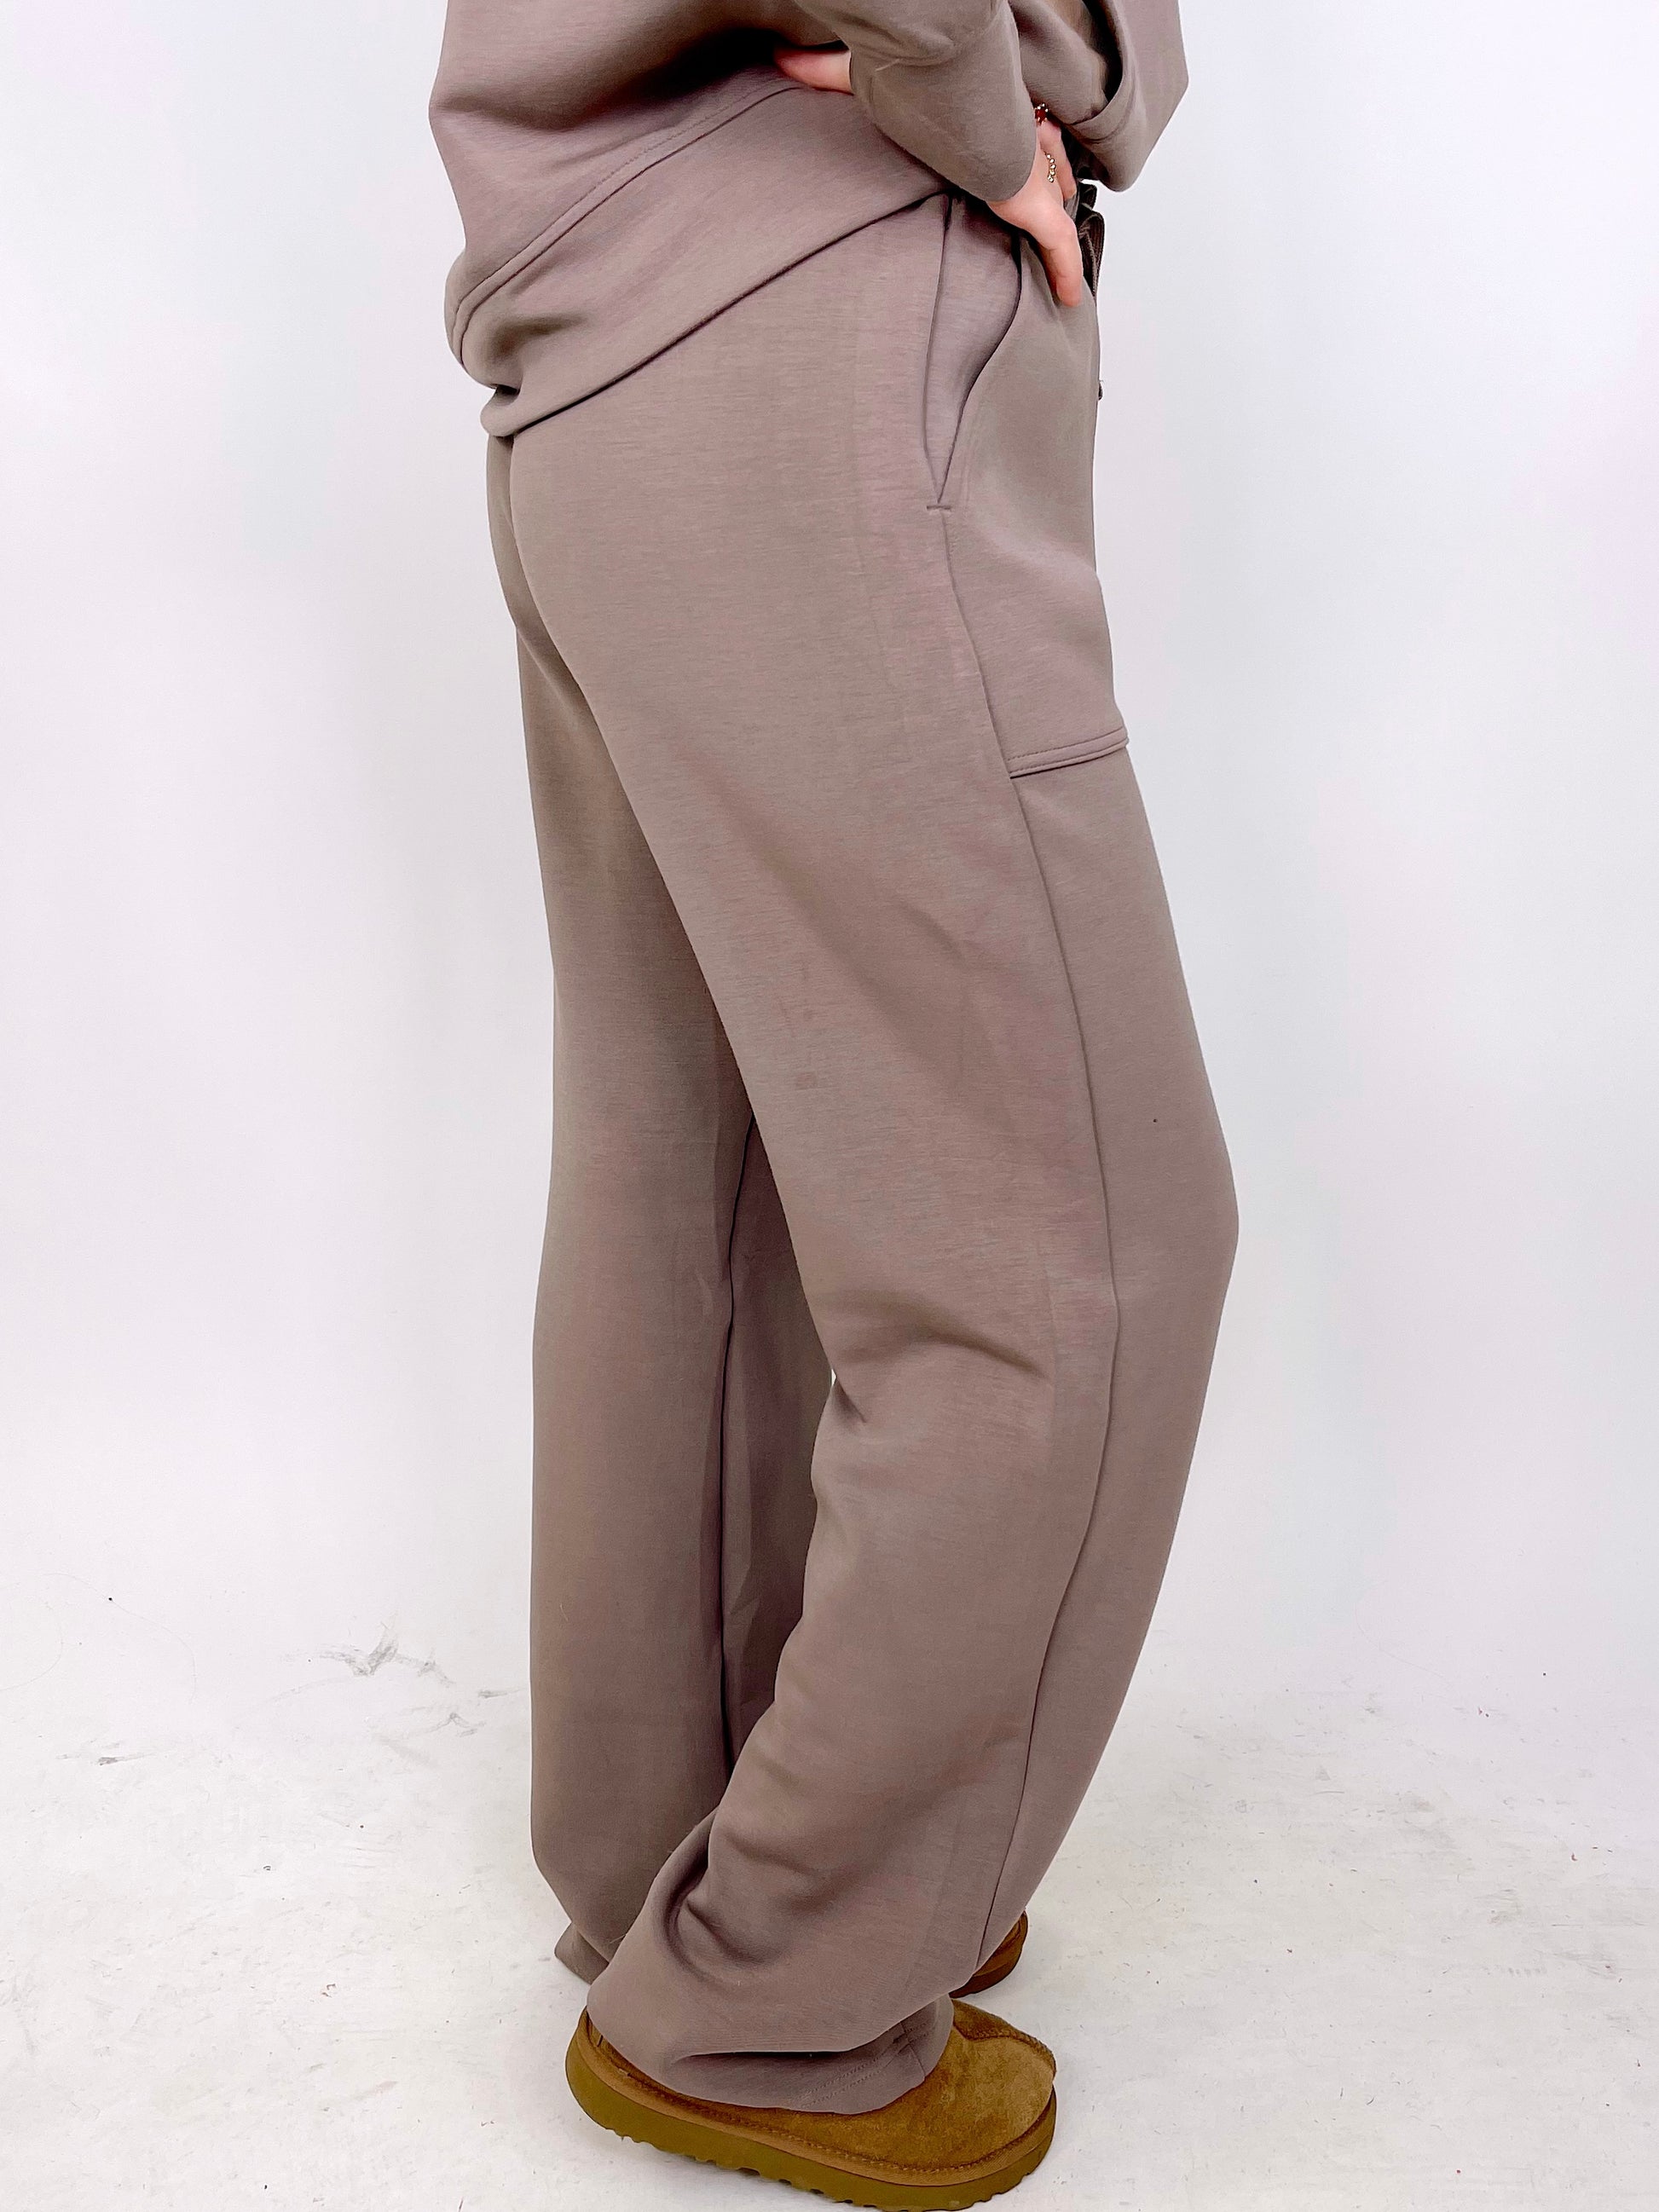 The Kaylie Bottoms-Lounge Pants-Rae Mode-The Village Shoppe, Women’s Fashion Boutique, Shop Online and In Store - Located in Muscle Shoals, AL.